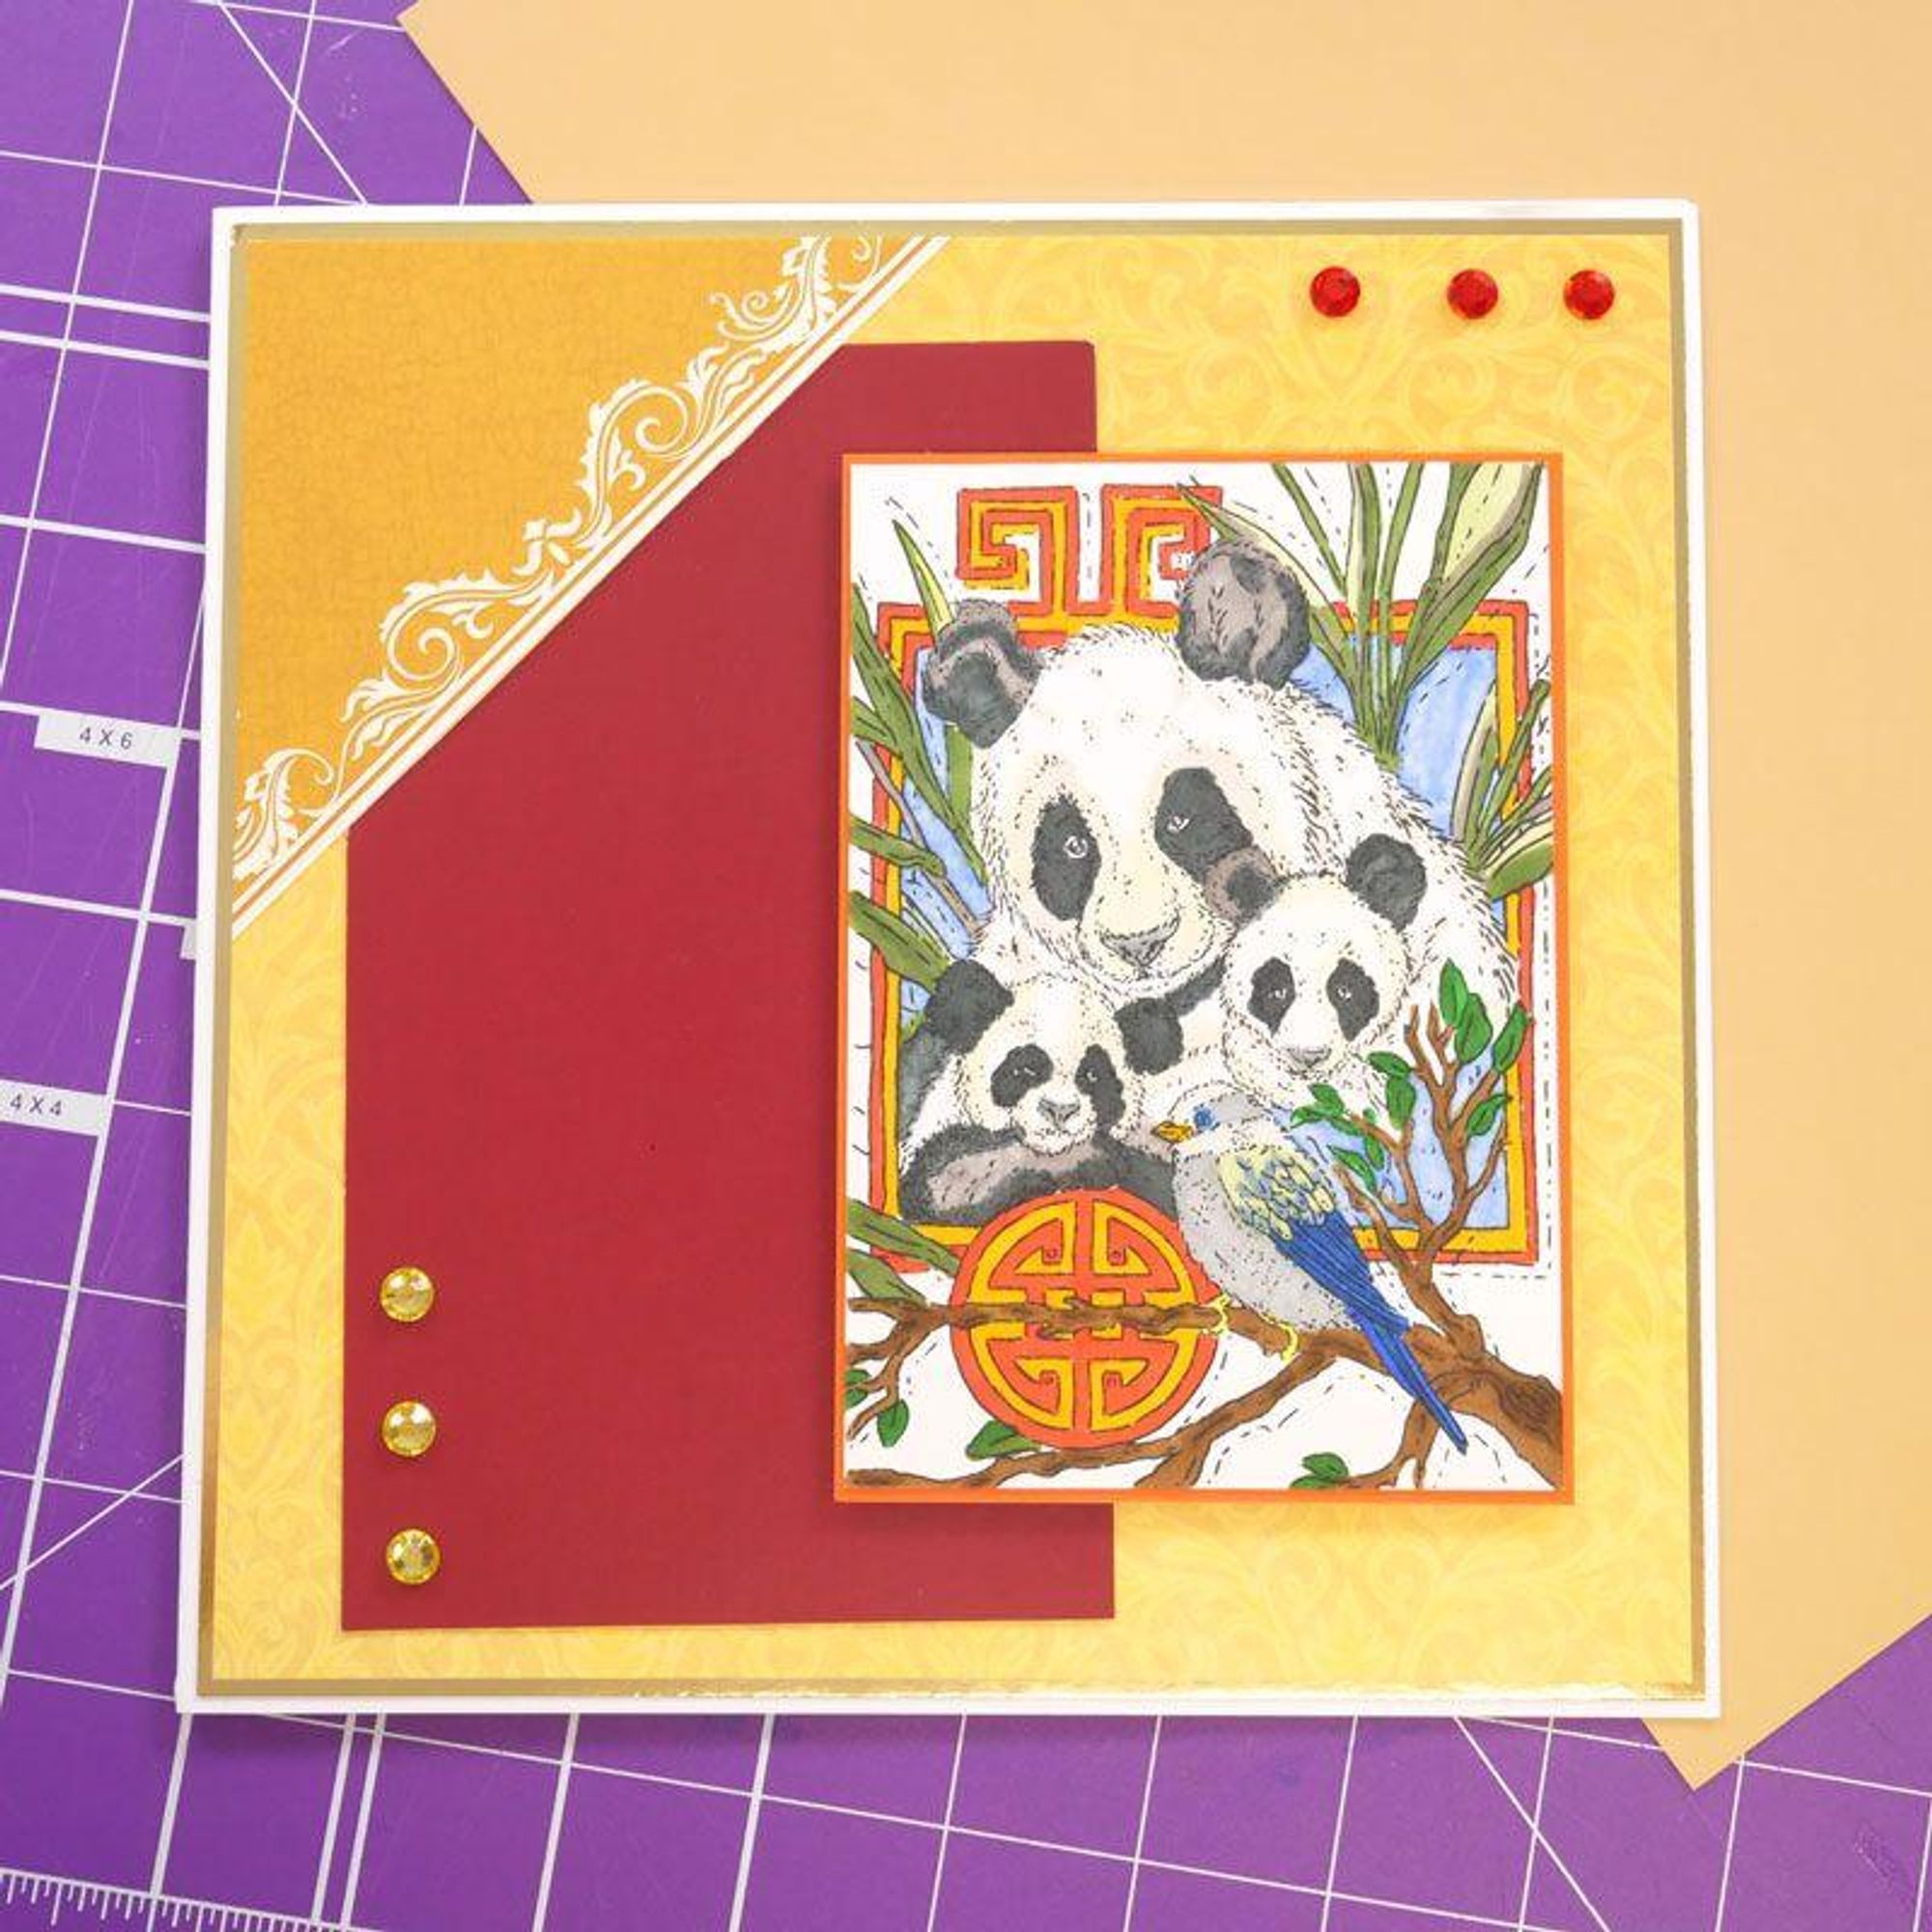 For the Love of Stamps - Peaceful Pandas A6 Stamp Set